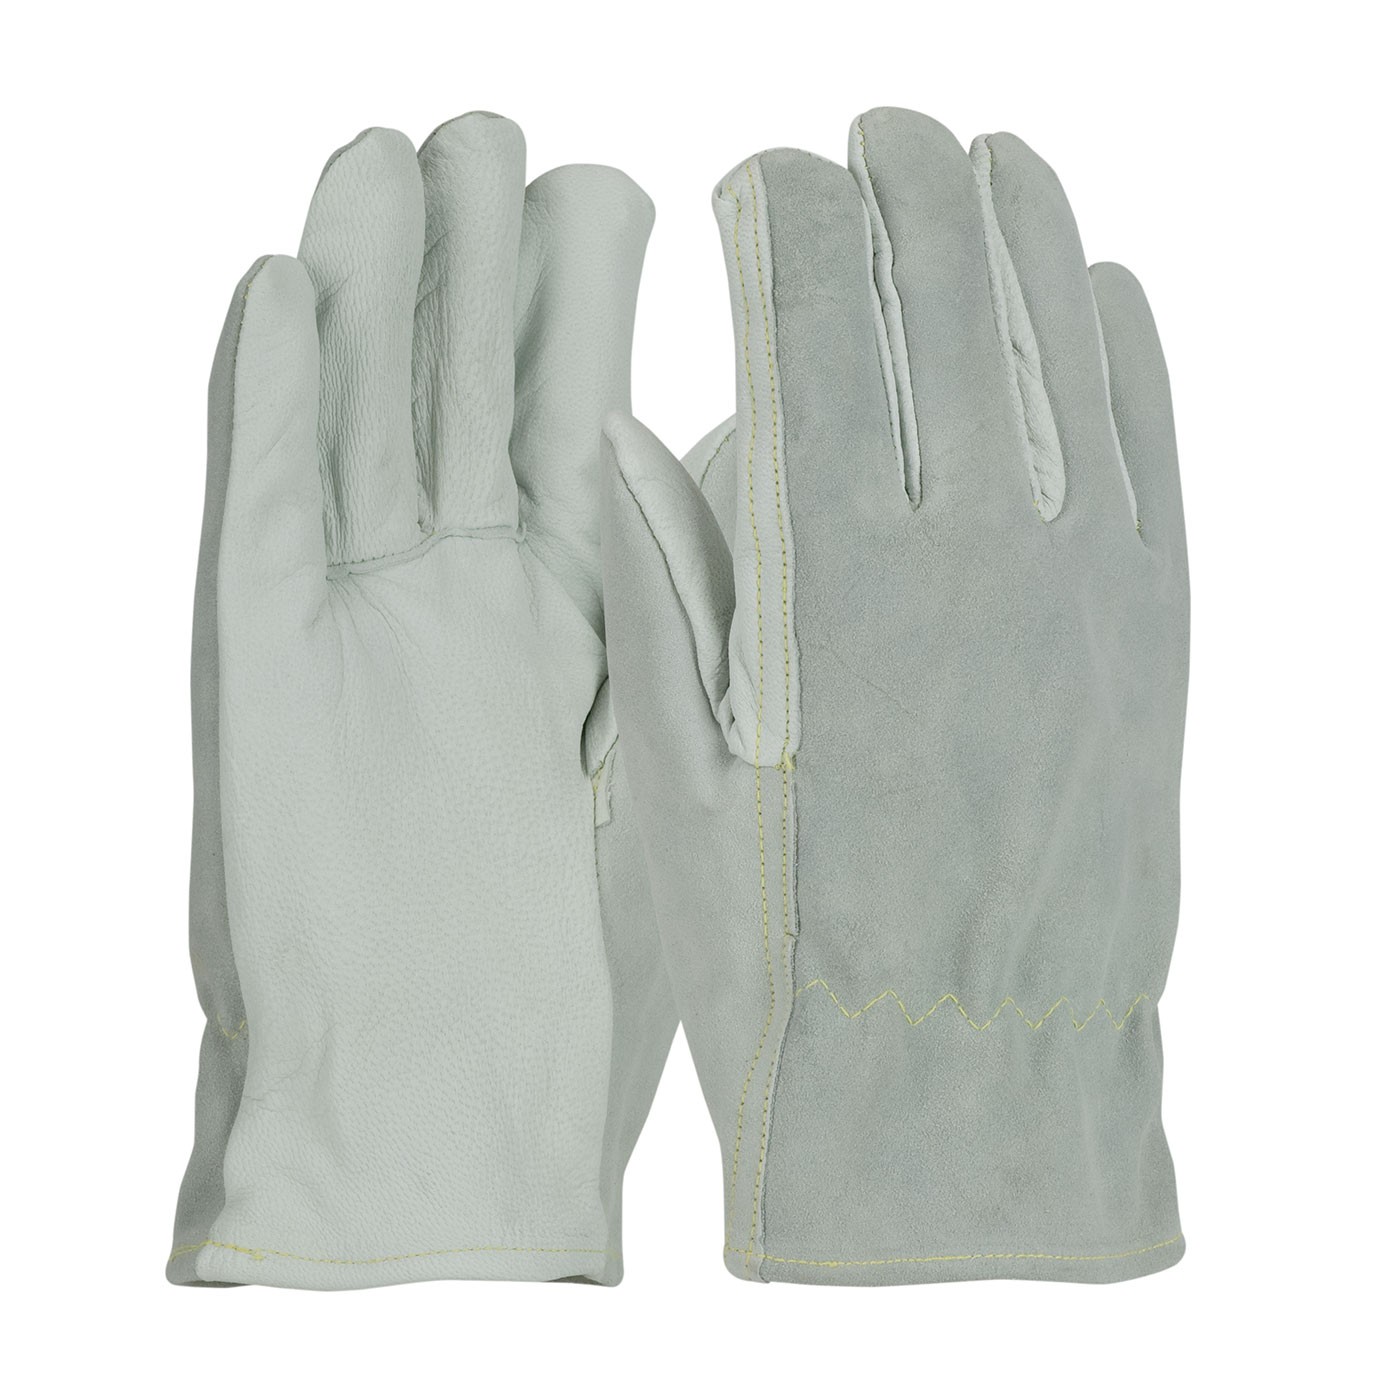 PIP® Top Grain Goatskin / Split Cowhide Leather Drivers Glove with Kevlar® Liner - Straight Thumb  (#09-K3720)